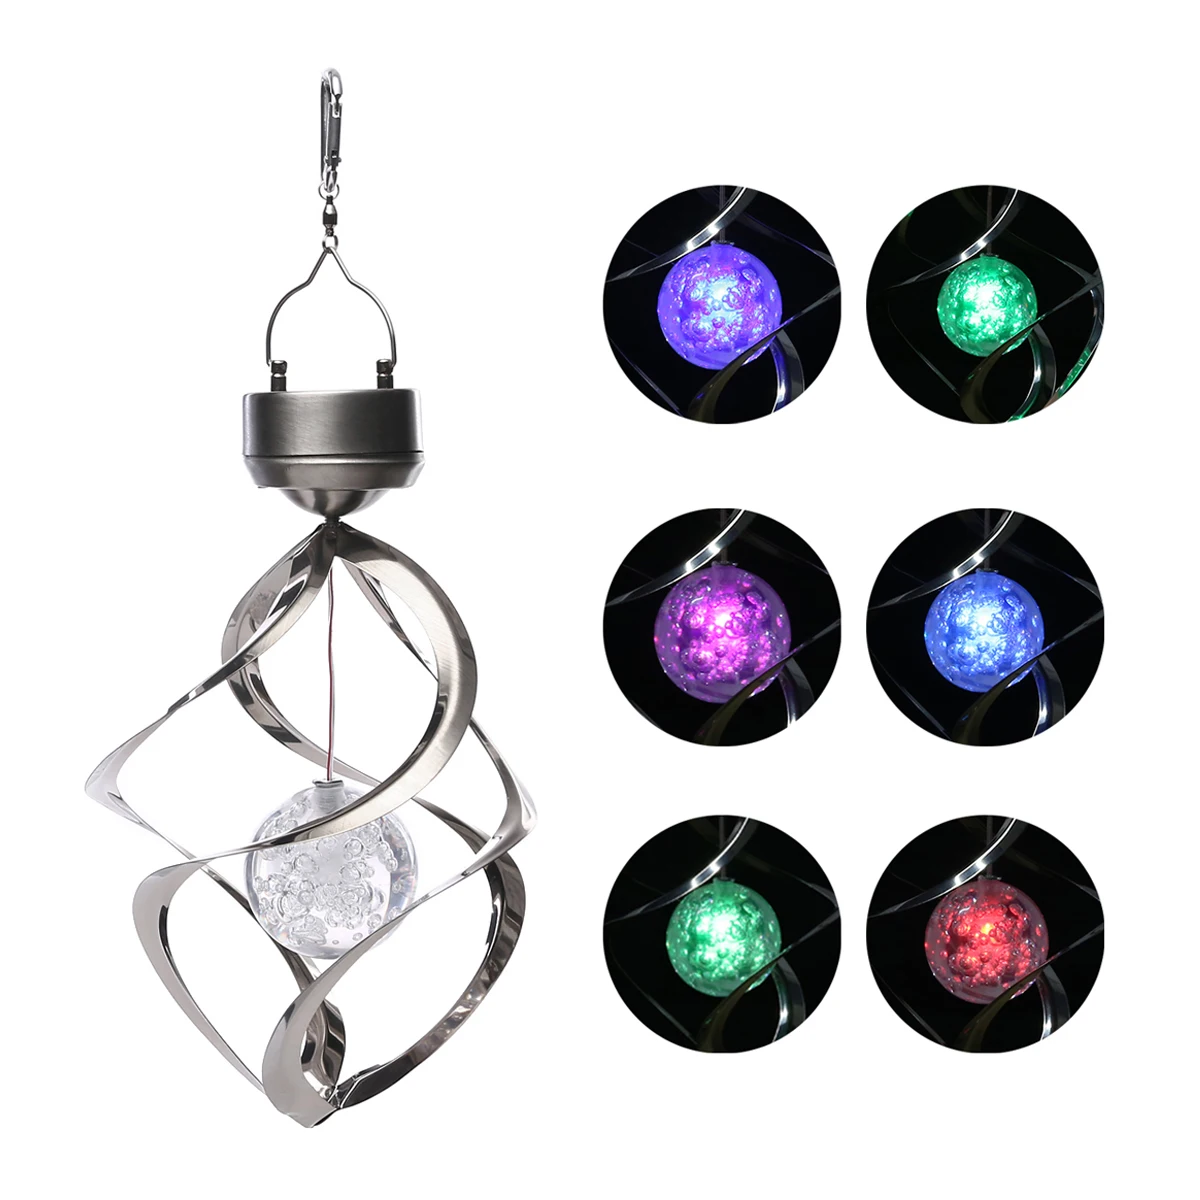 Solar Wind Chime LED Color Changing Hanging Light Decorative Solar Powered Wind Chime Spinner Light For Home Garden Decor